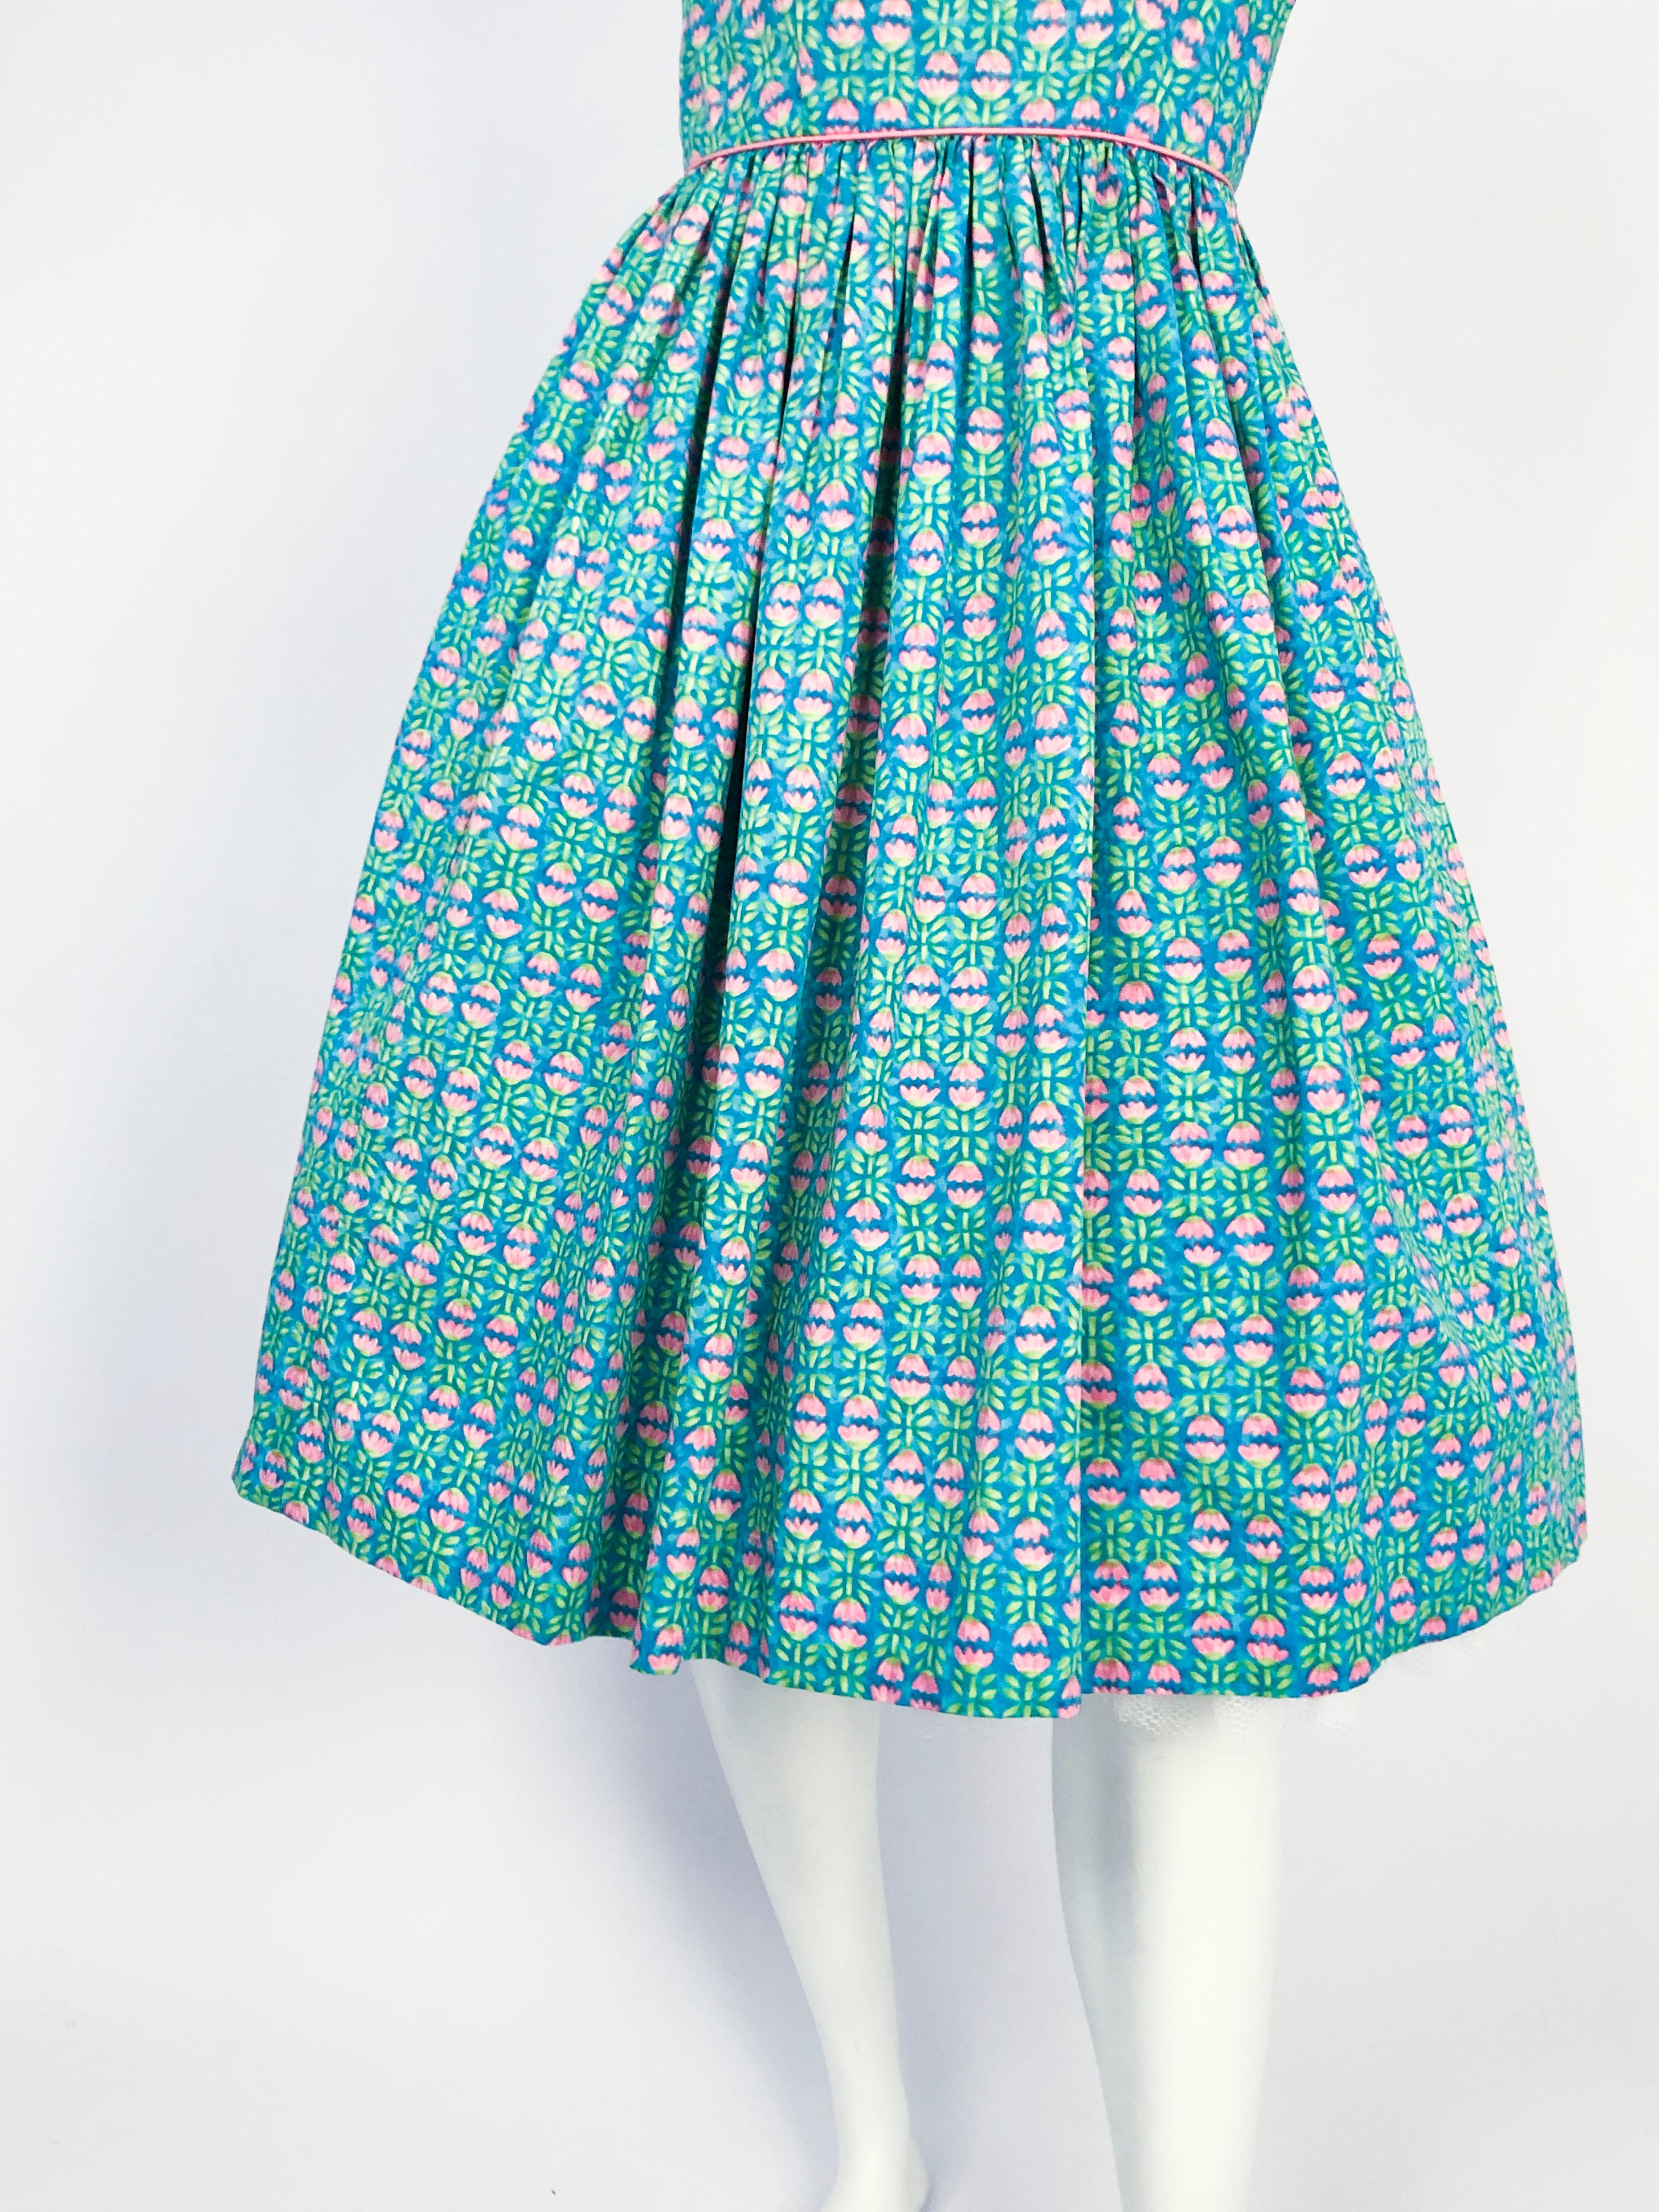 1960s Lanz Tulip Printed Summer Dress. The base color is an aqua blue that has baby pink tulips and green leaves. The dress has a fitted bodice with a full skirt (photographed with a petticoat that is not included), pink border trimmings, and